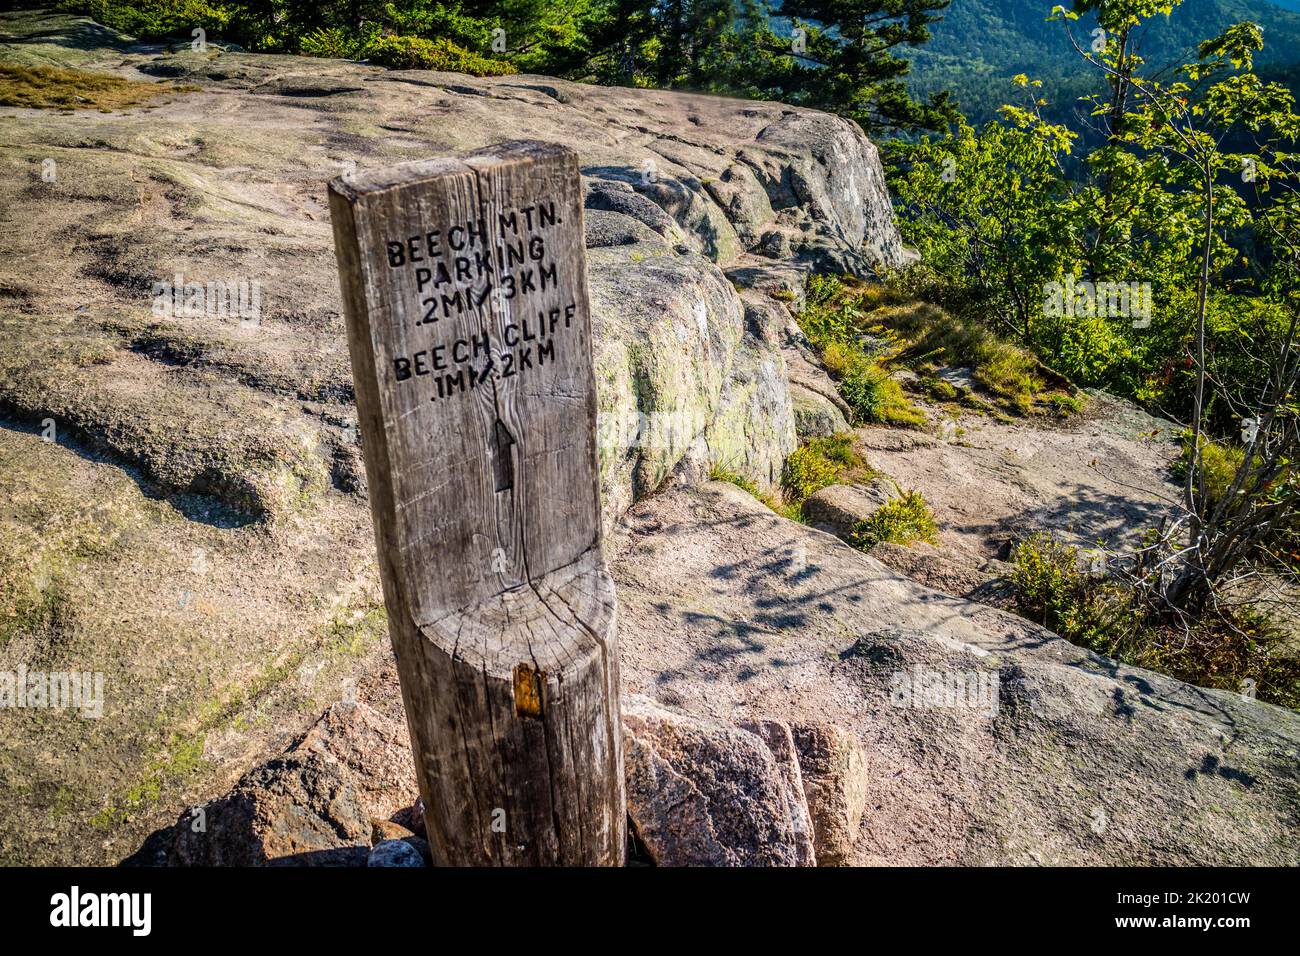 A description board for the trail in Acadia National Park, Maine Stock Photo